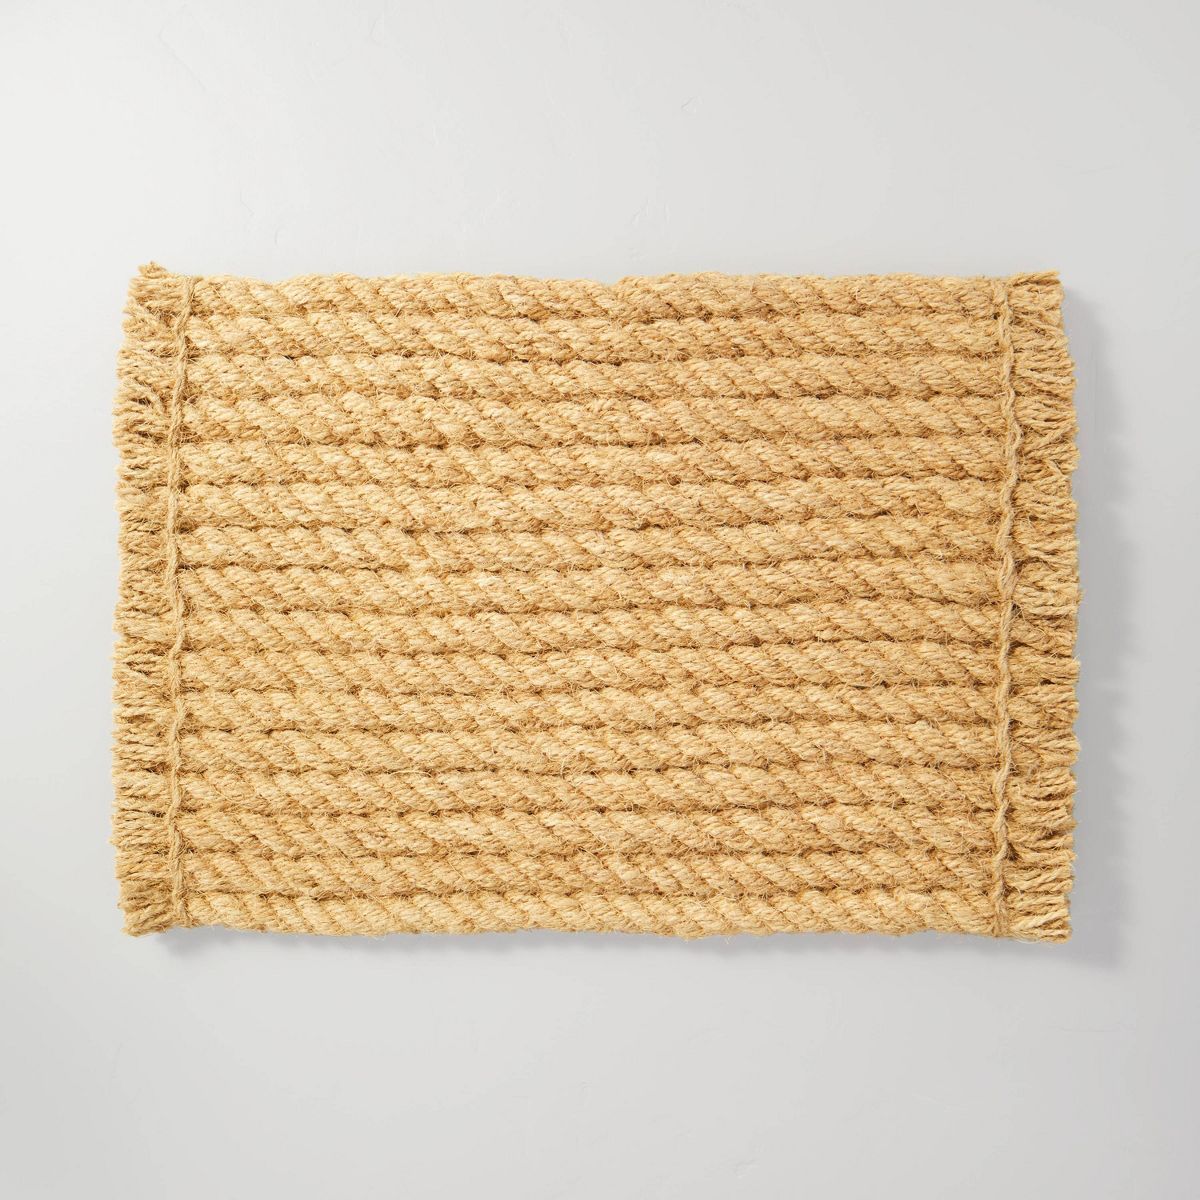 Chunky Twisted Rope Coir Doormat Tan - Hearth & Hand™ with Magnolia | Target